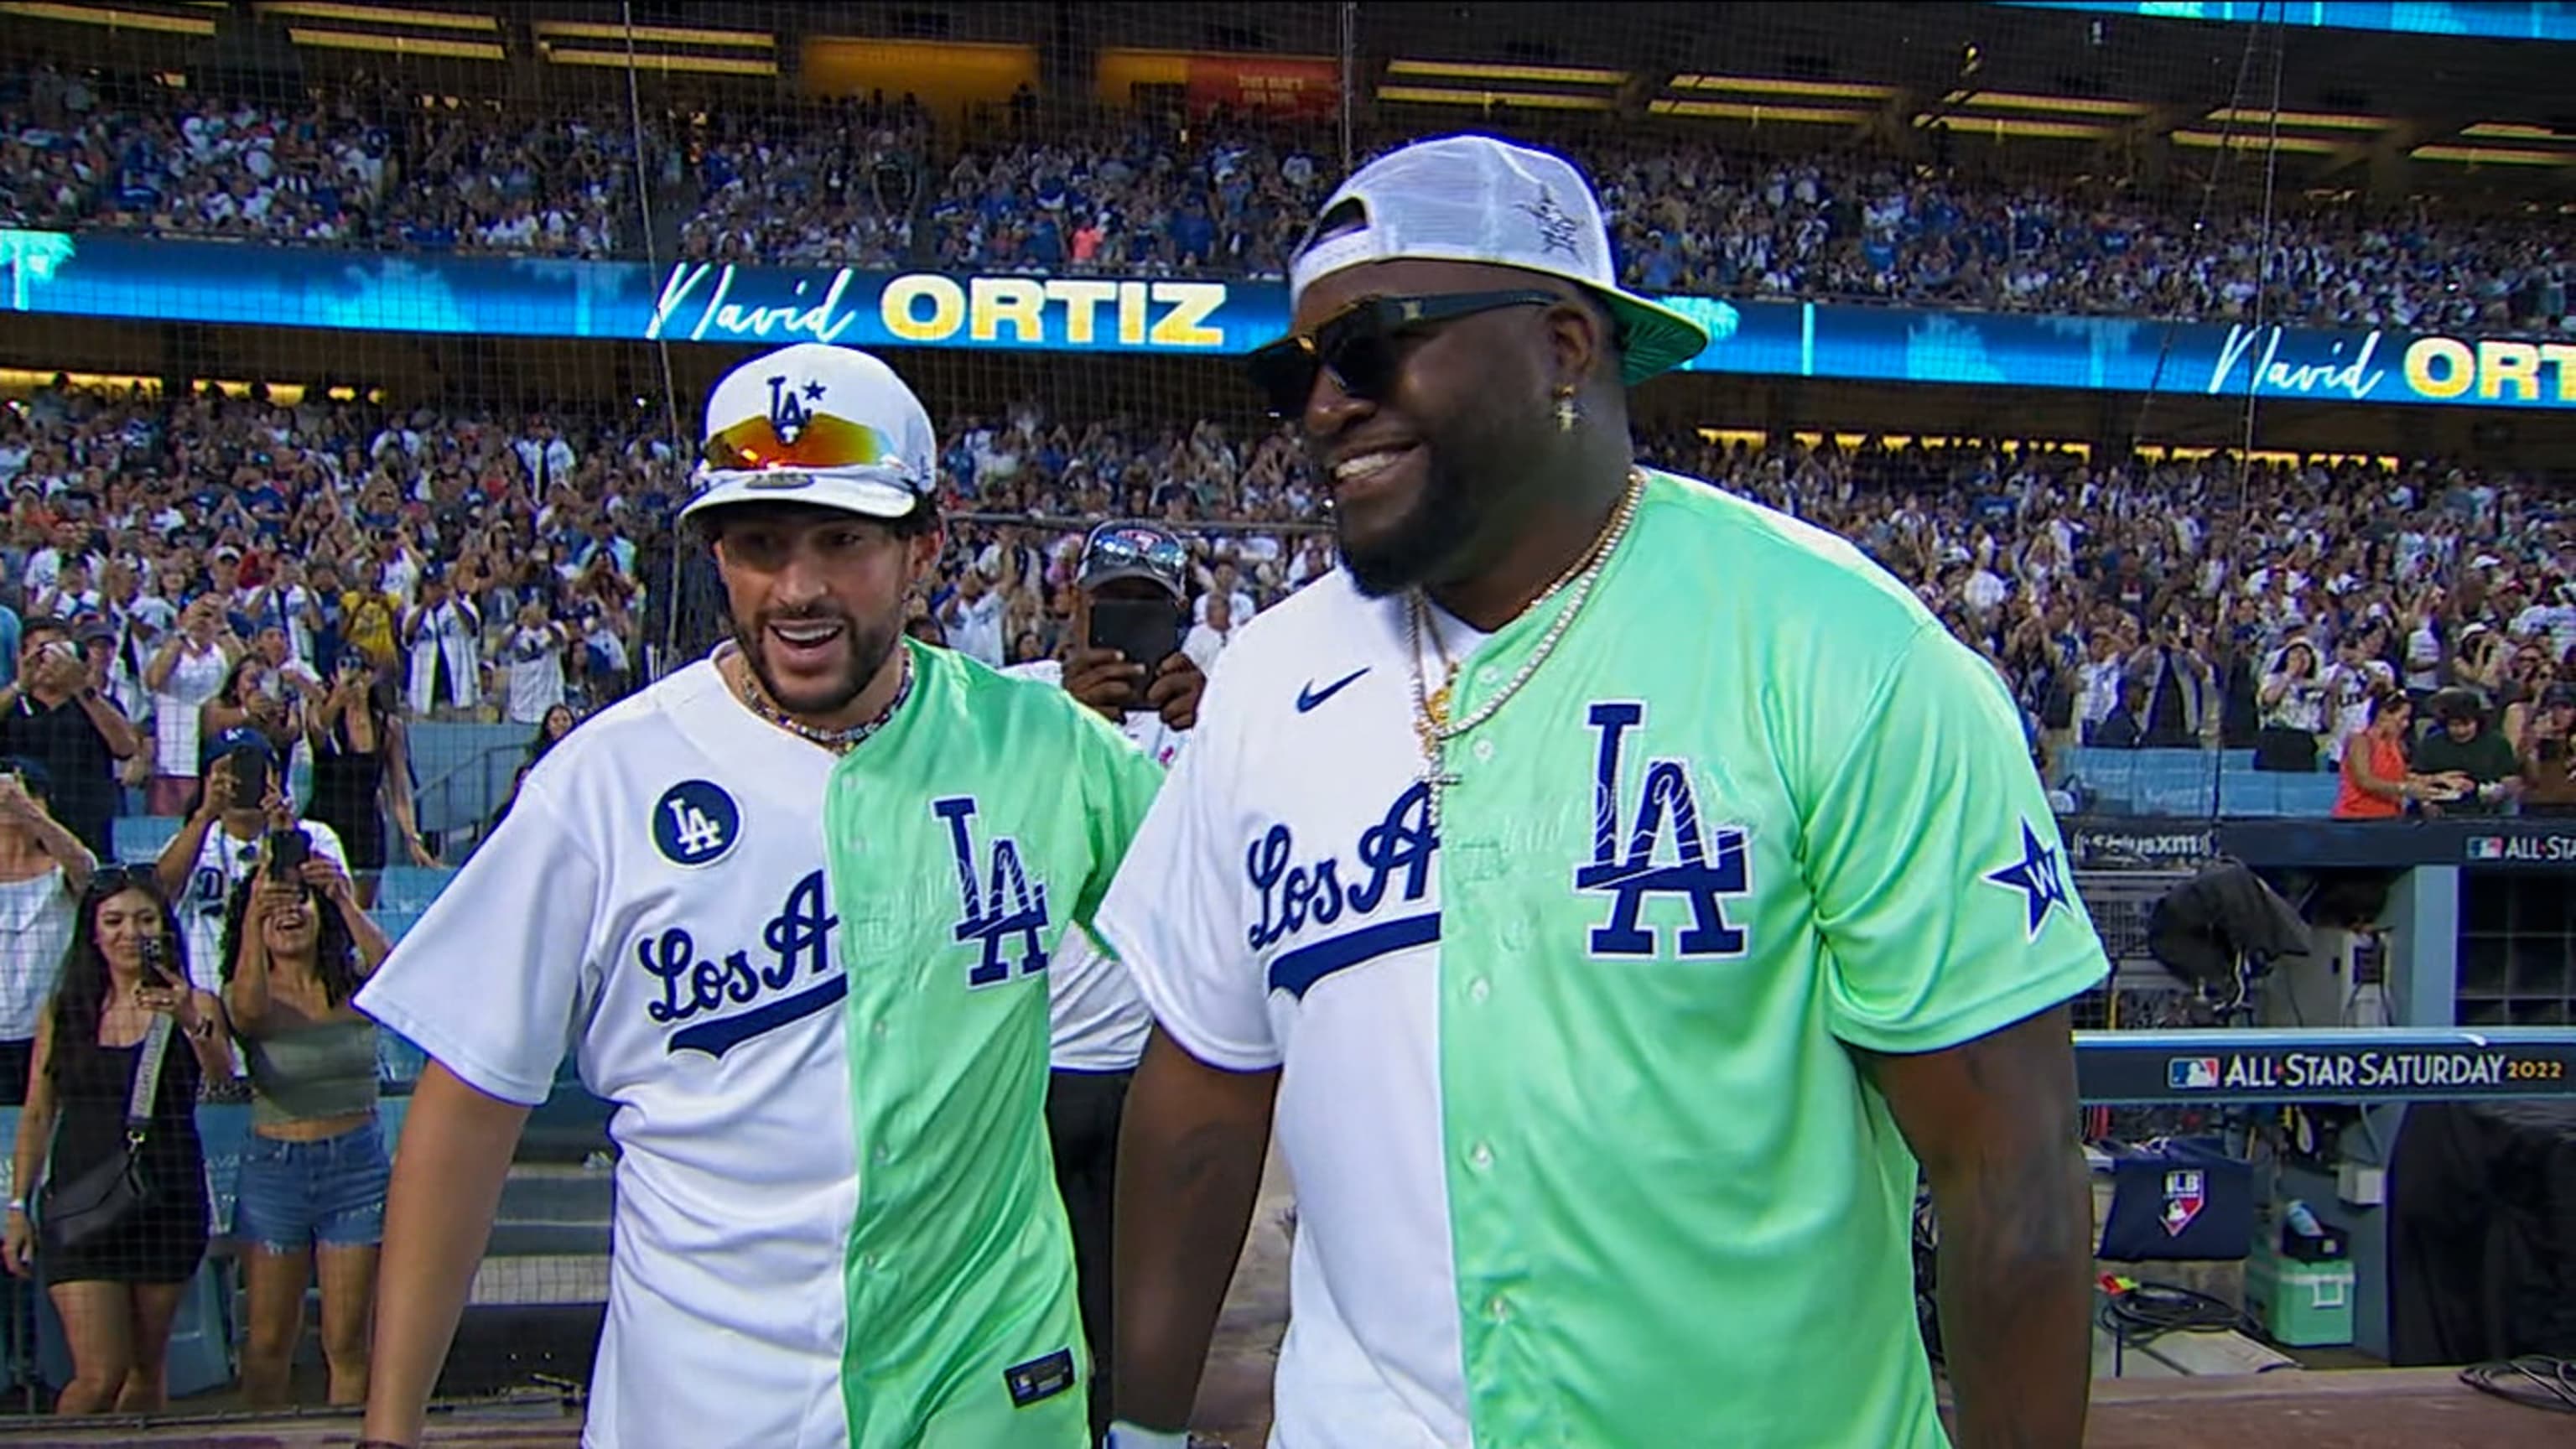 Best non-baseball moments from All-Star Week in Los Angeles